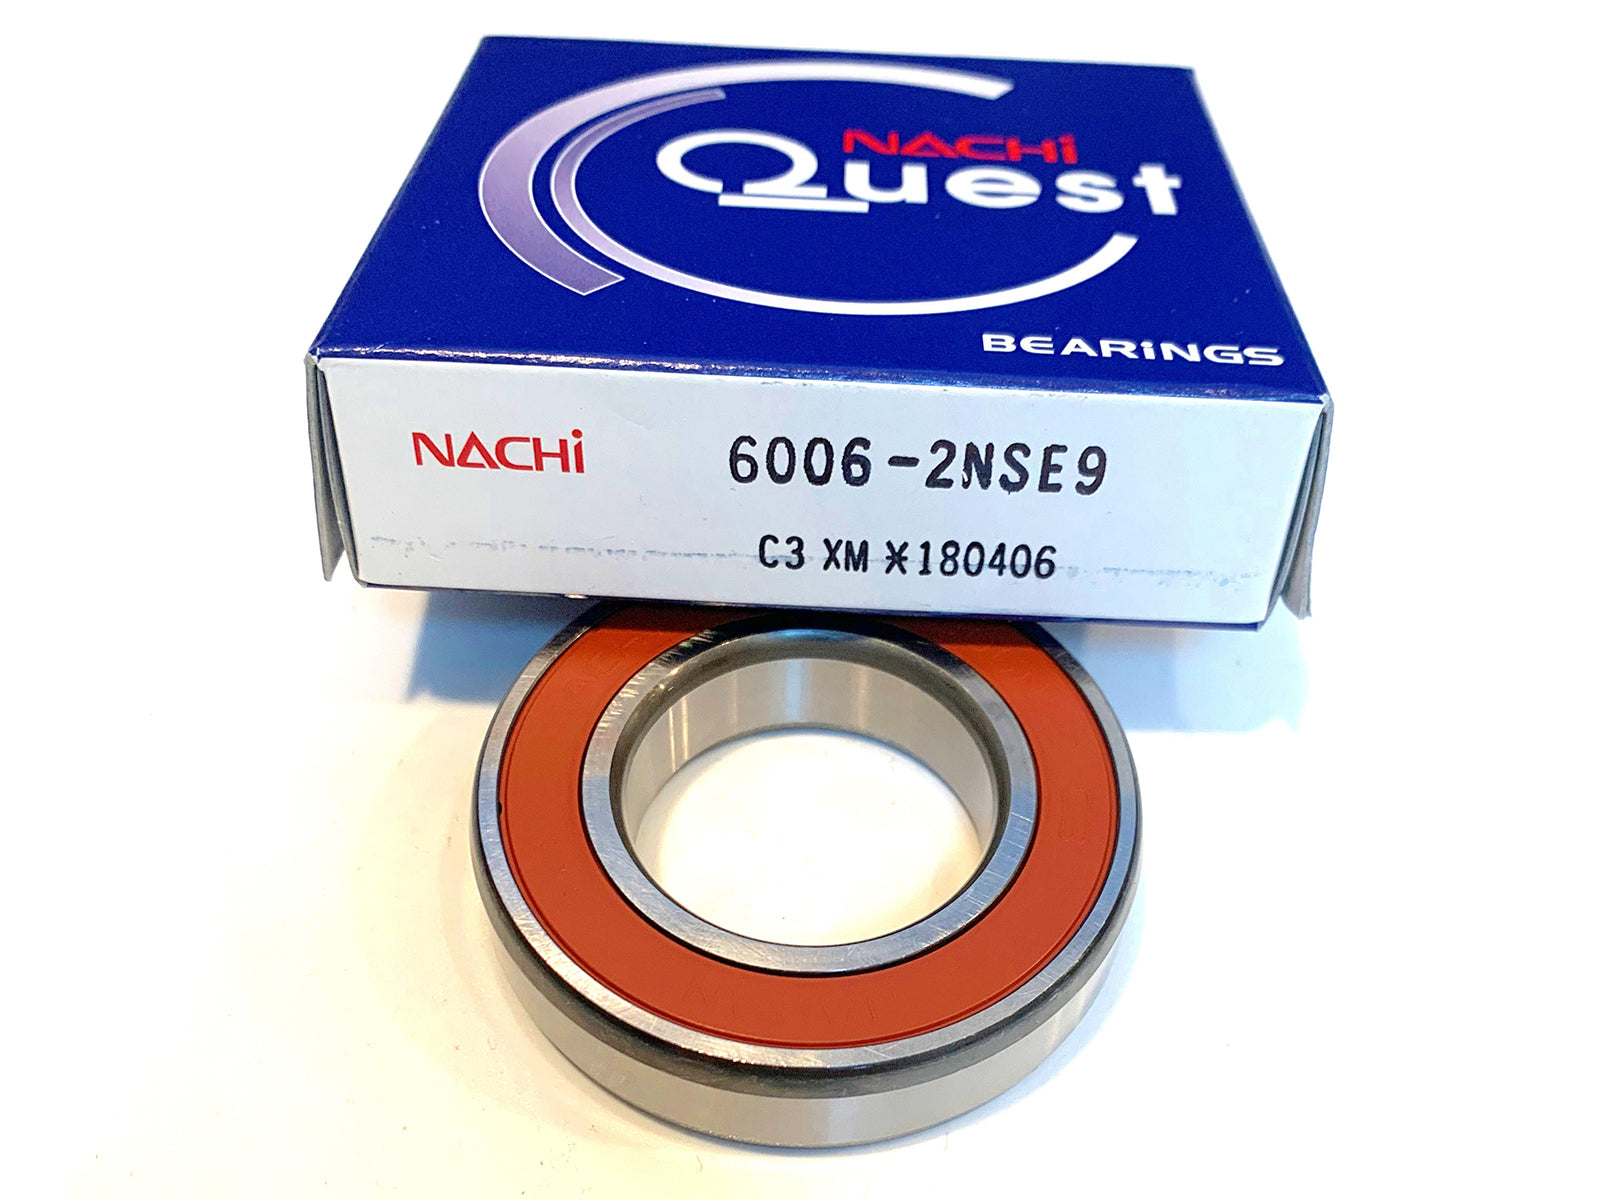 Nachi 6006-2nse9 Single Row Ball Bearing C3 for sale online 